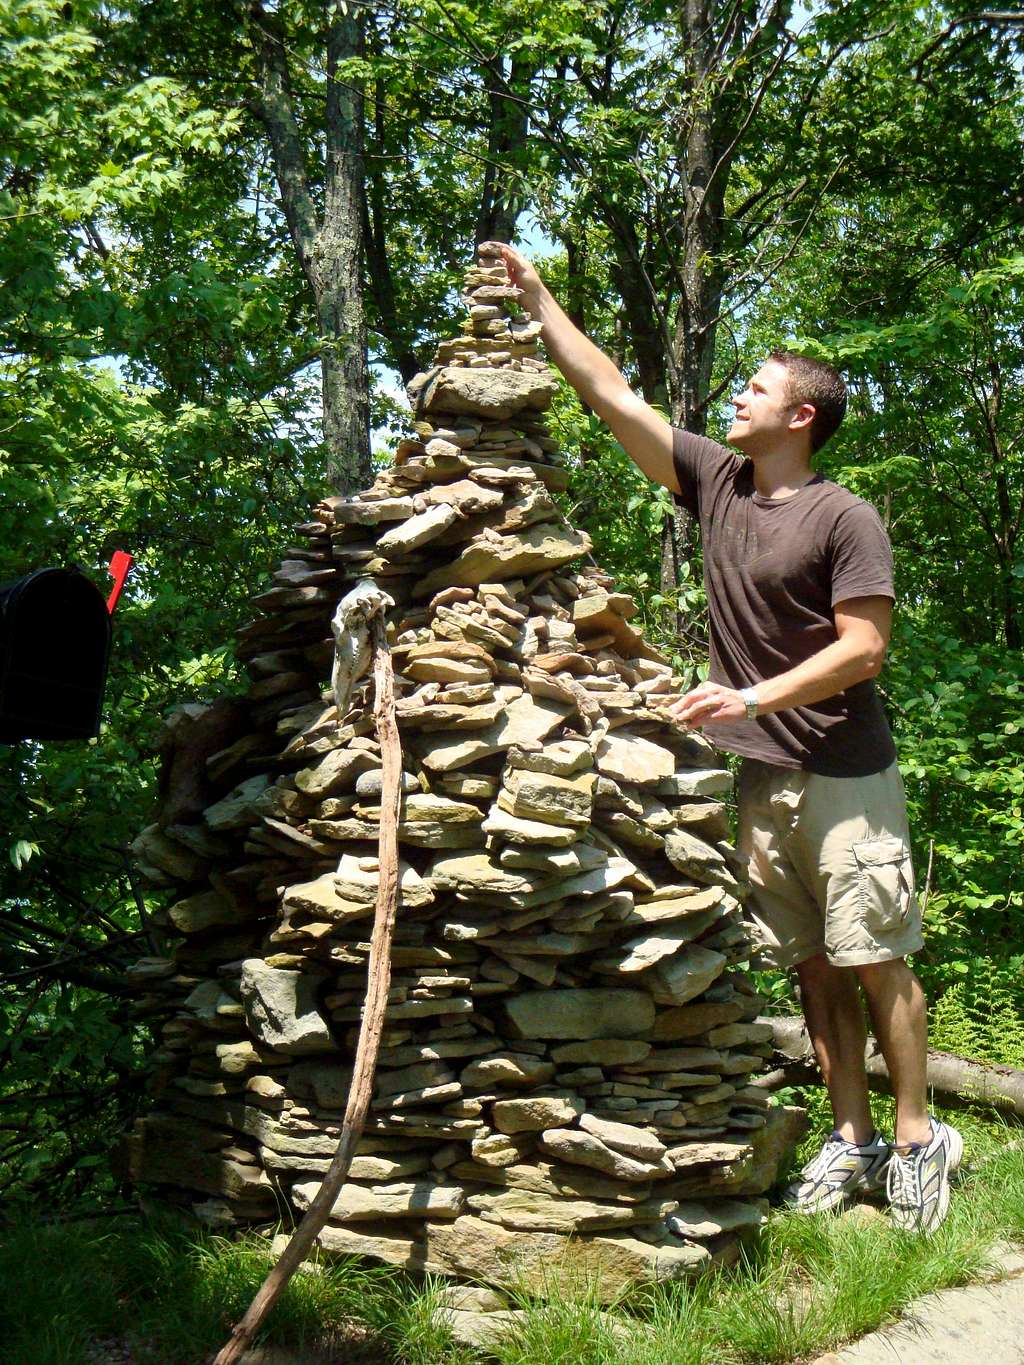 adding to the cairn